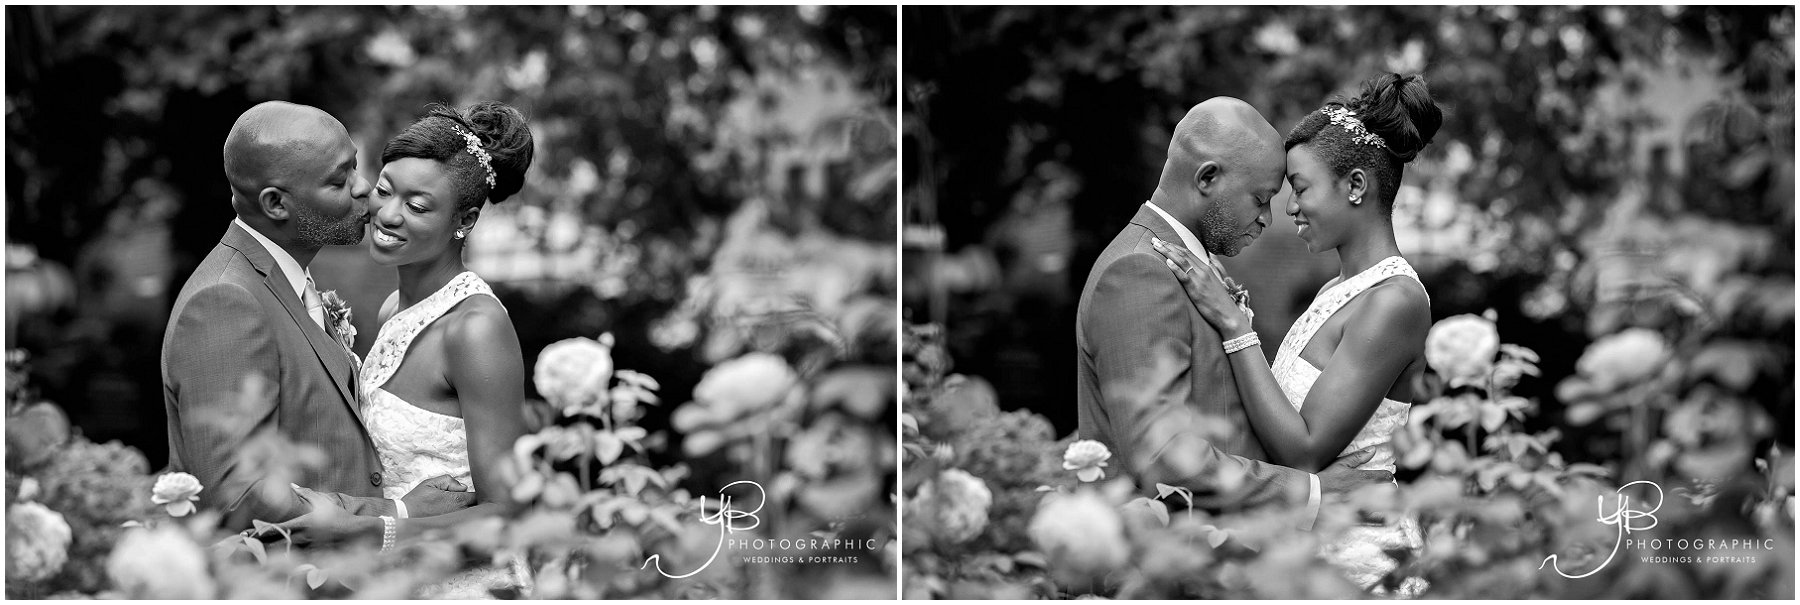 Romantic wedding portraits in black in white, following this bride and grooms wedding at Chelsea Old Town Hall, by ybphotographic